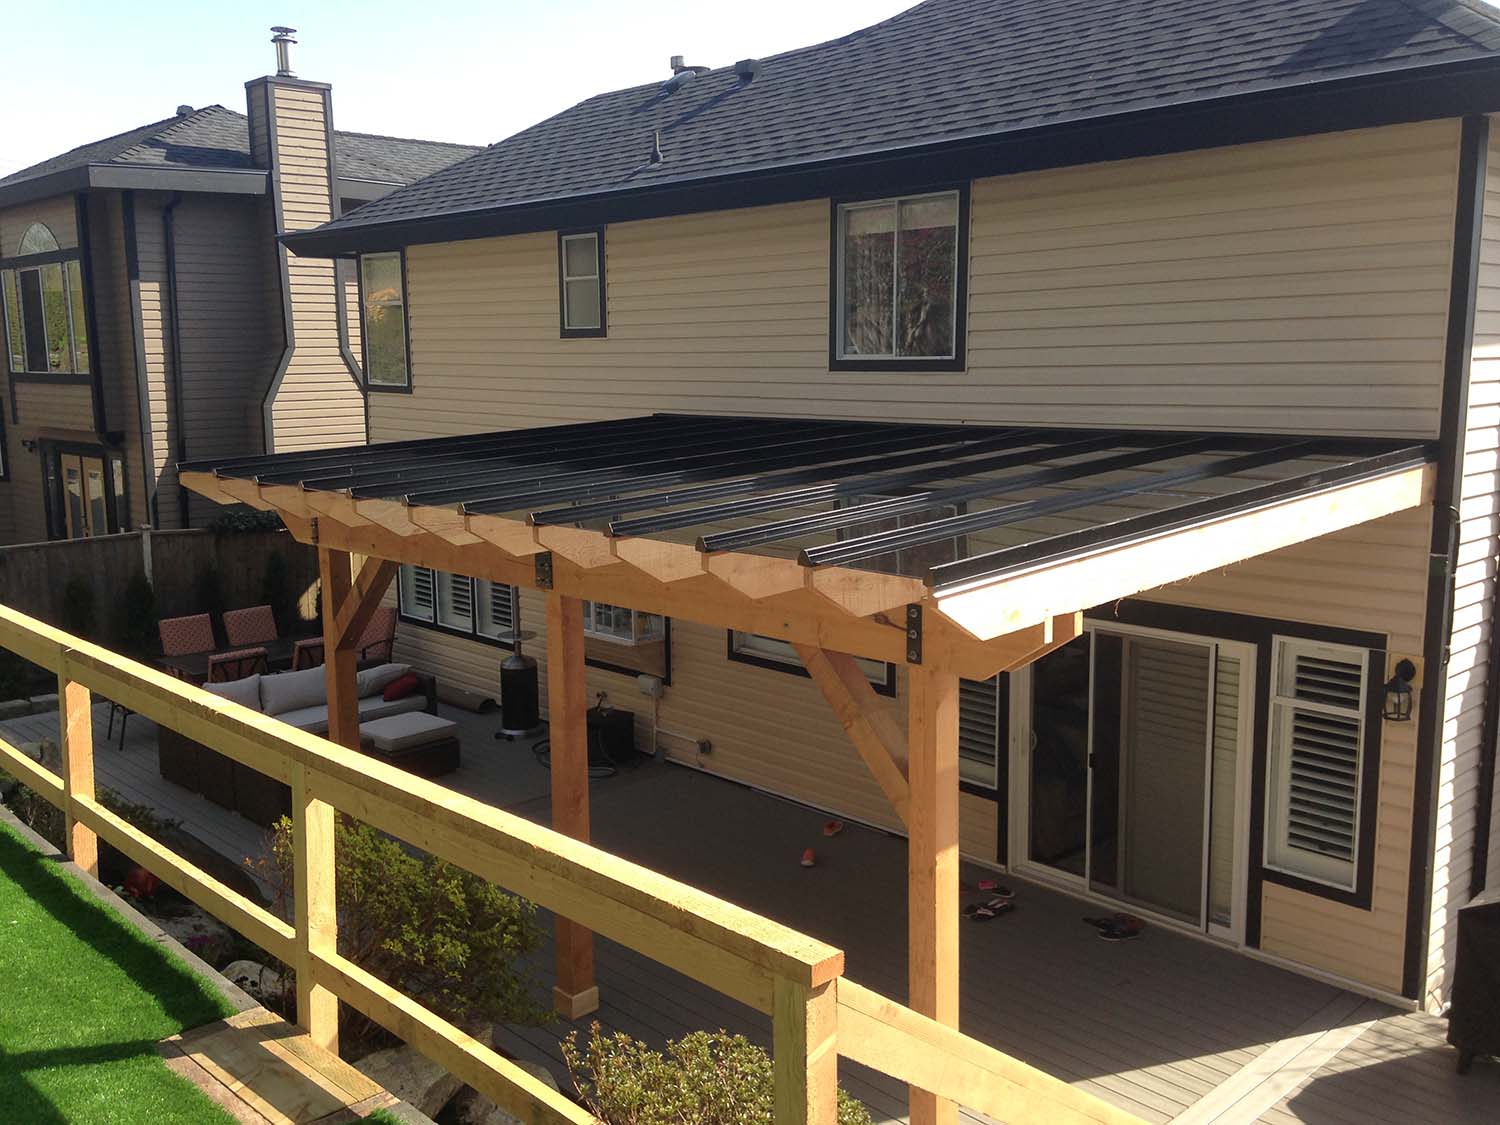 how to build a wood awning frame